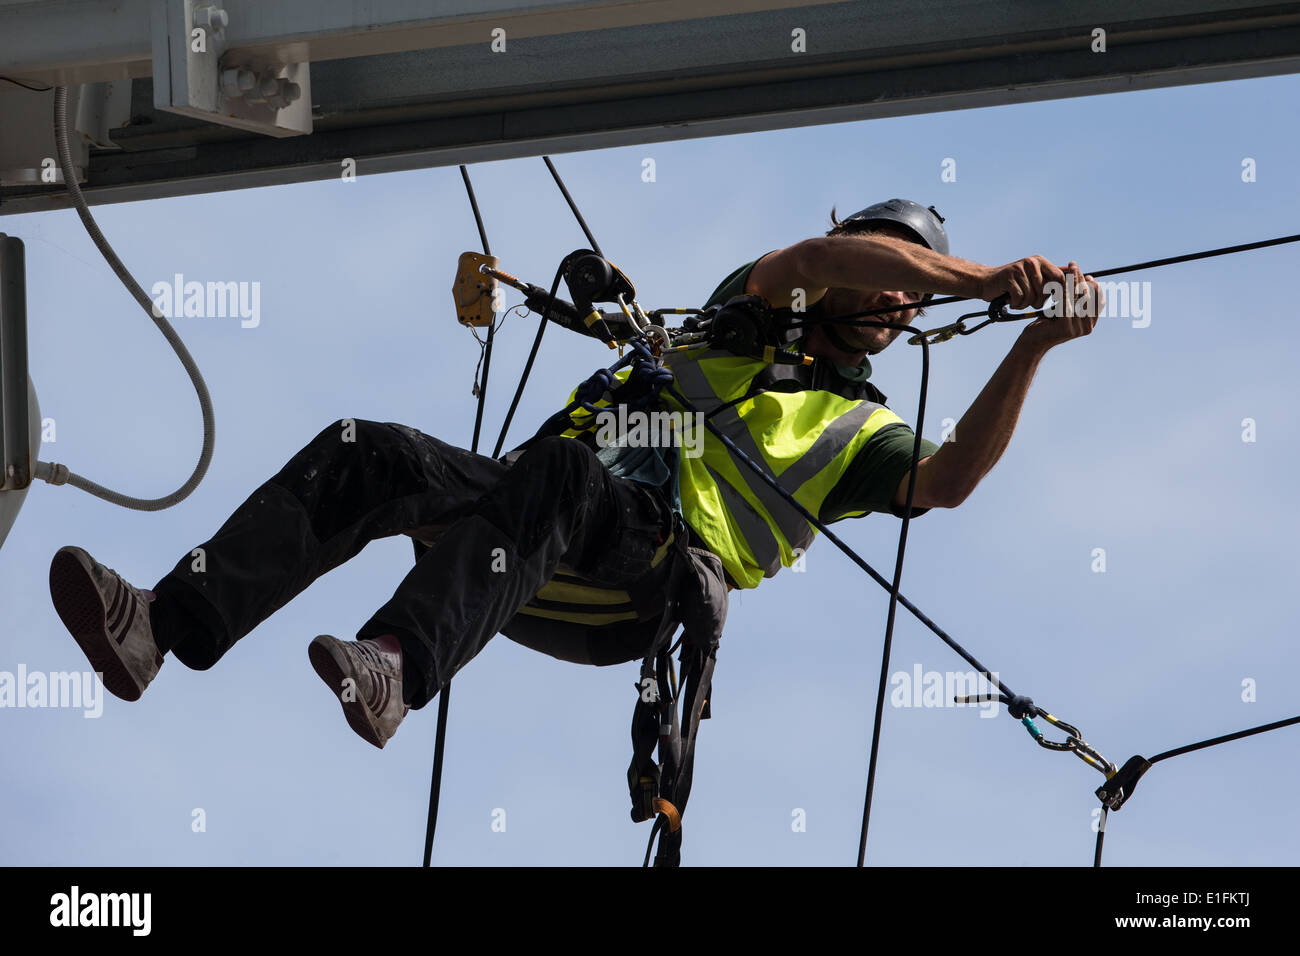 Tradesman workman cleaning a roof using ropes and pulleys abseil mountaineering climbing equipment Stock Photo